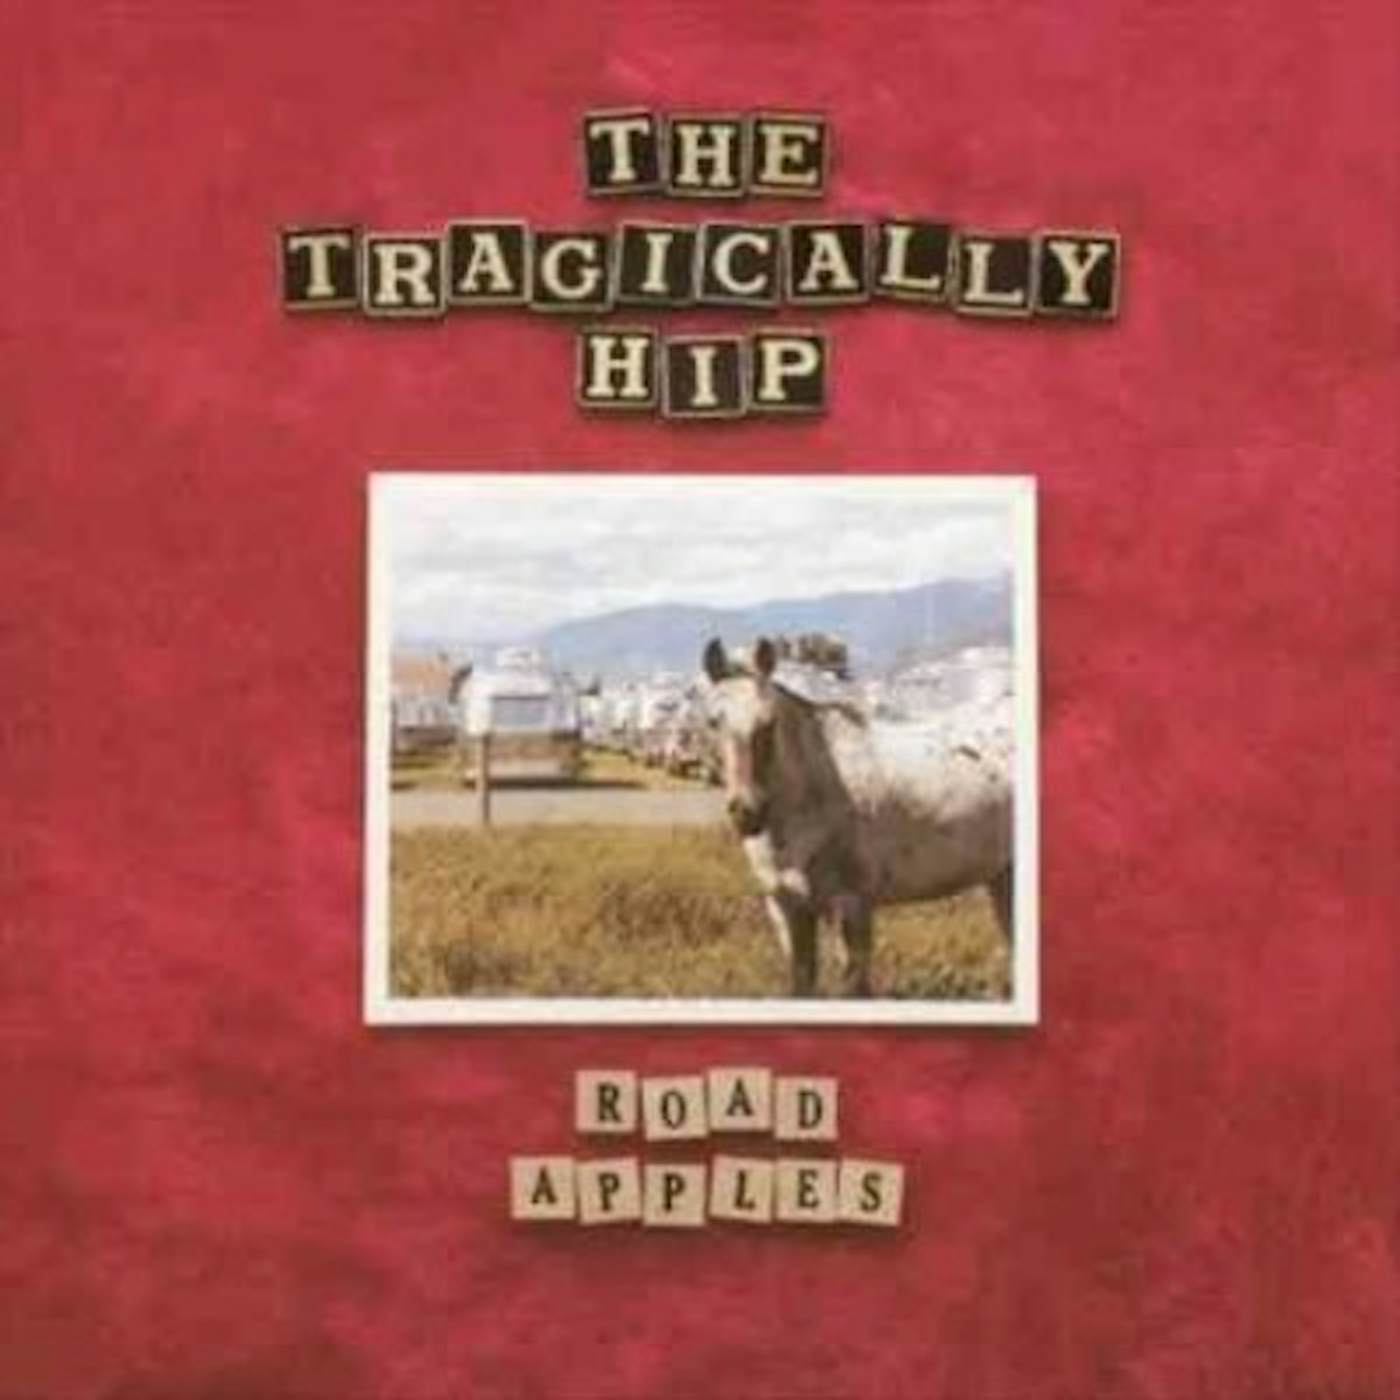 The Tragically Hip ROAD APPLES (180G) Vinyl Record